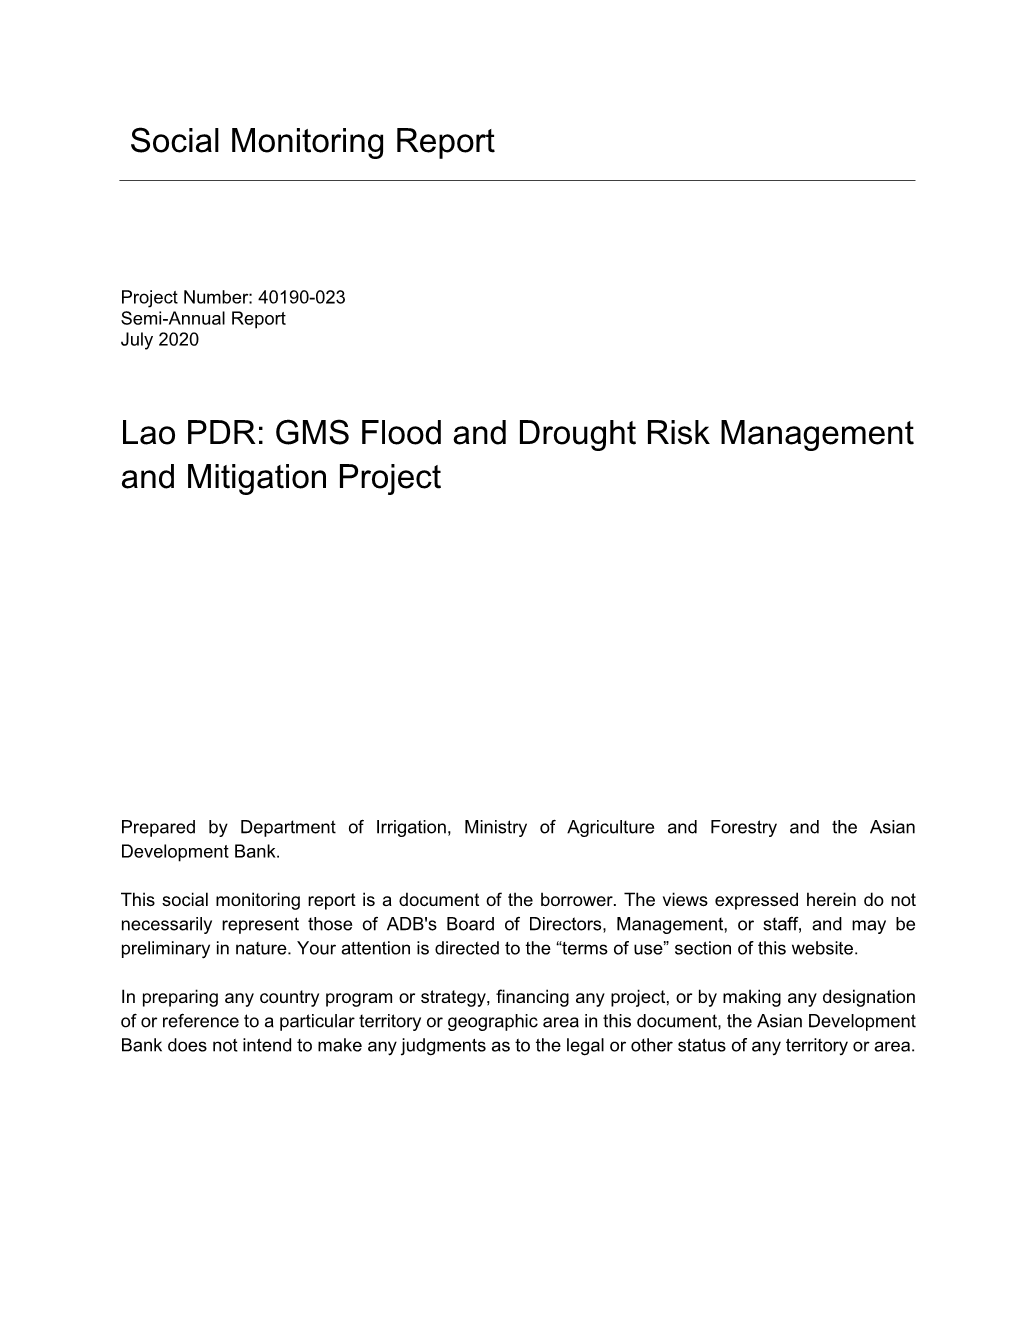 GMS Flood and Drought Risk Management and Mitigation Project